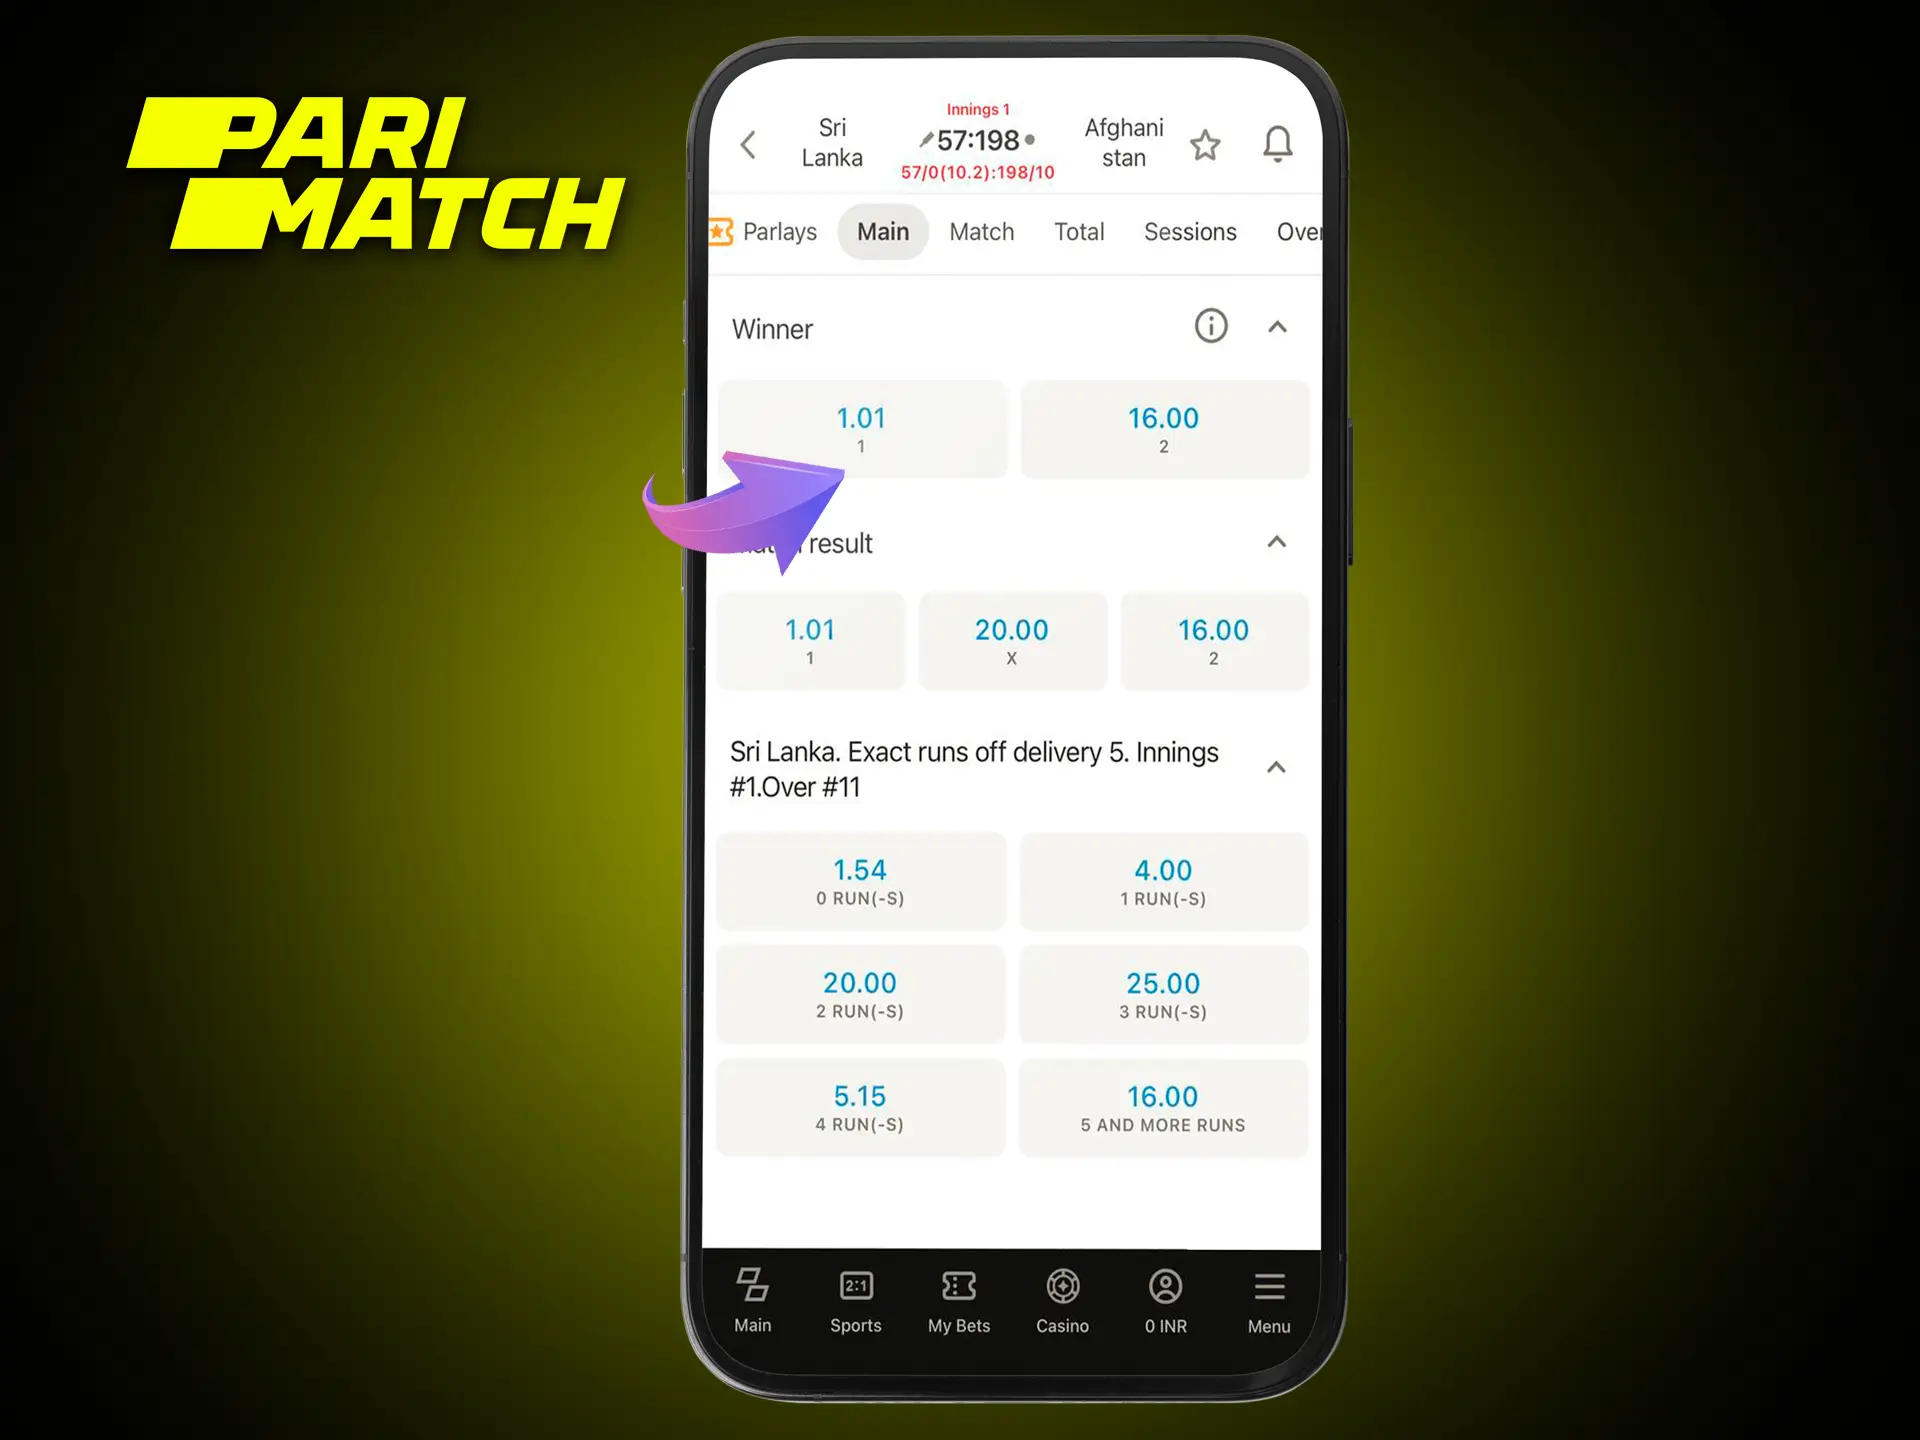 Use the SportBetting article to choose the right odds for your bets on Parimatch.